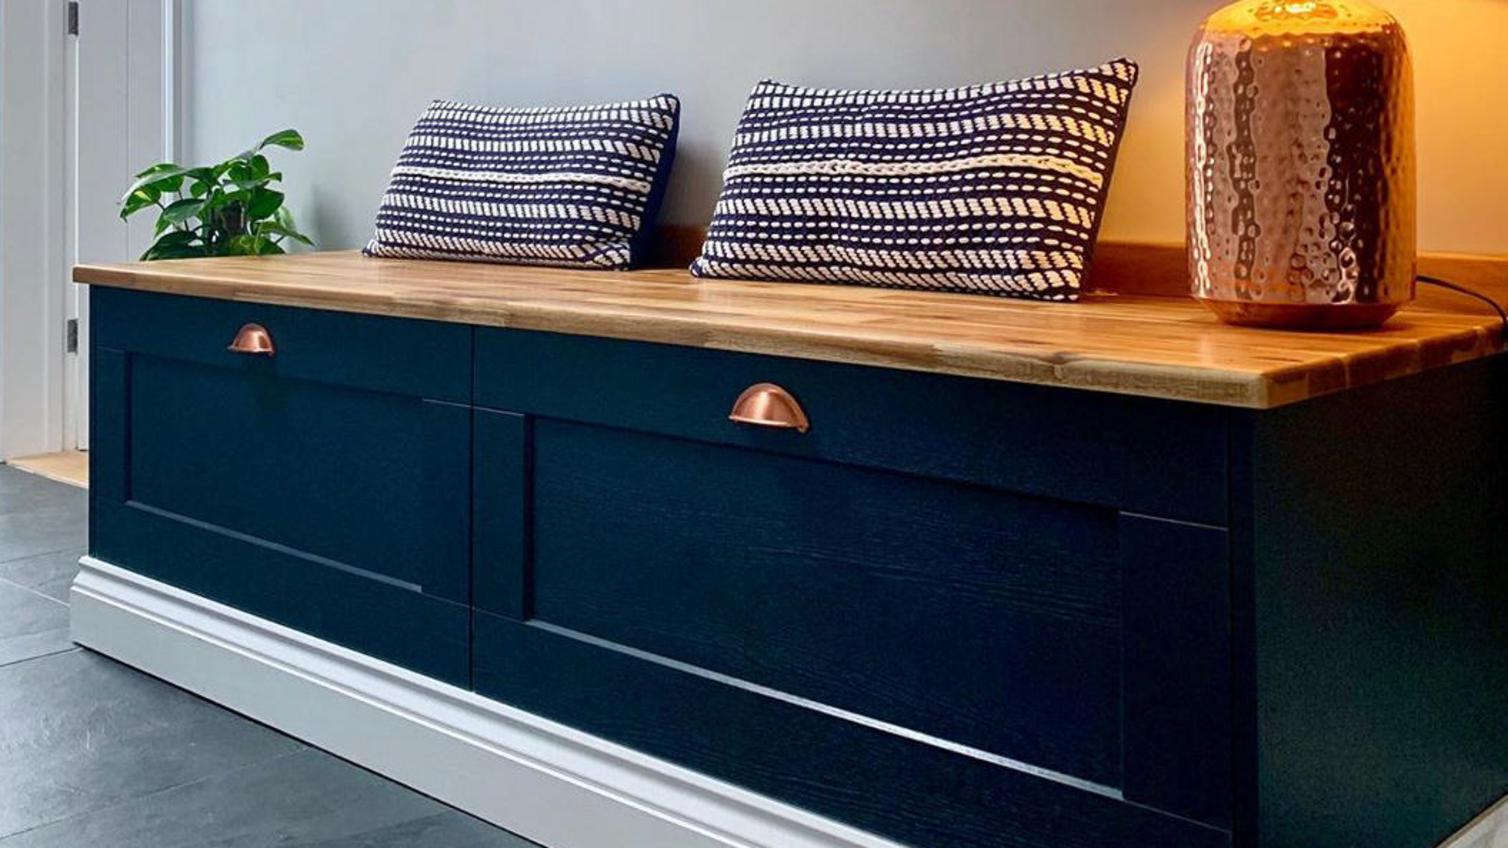 Combining deep drawers with a countertop for a boot room storage idea that creates a comfy bench.